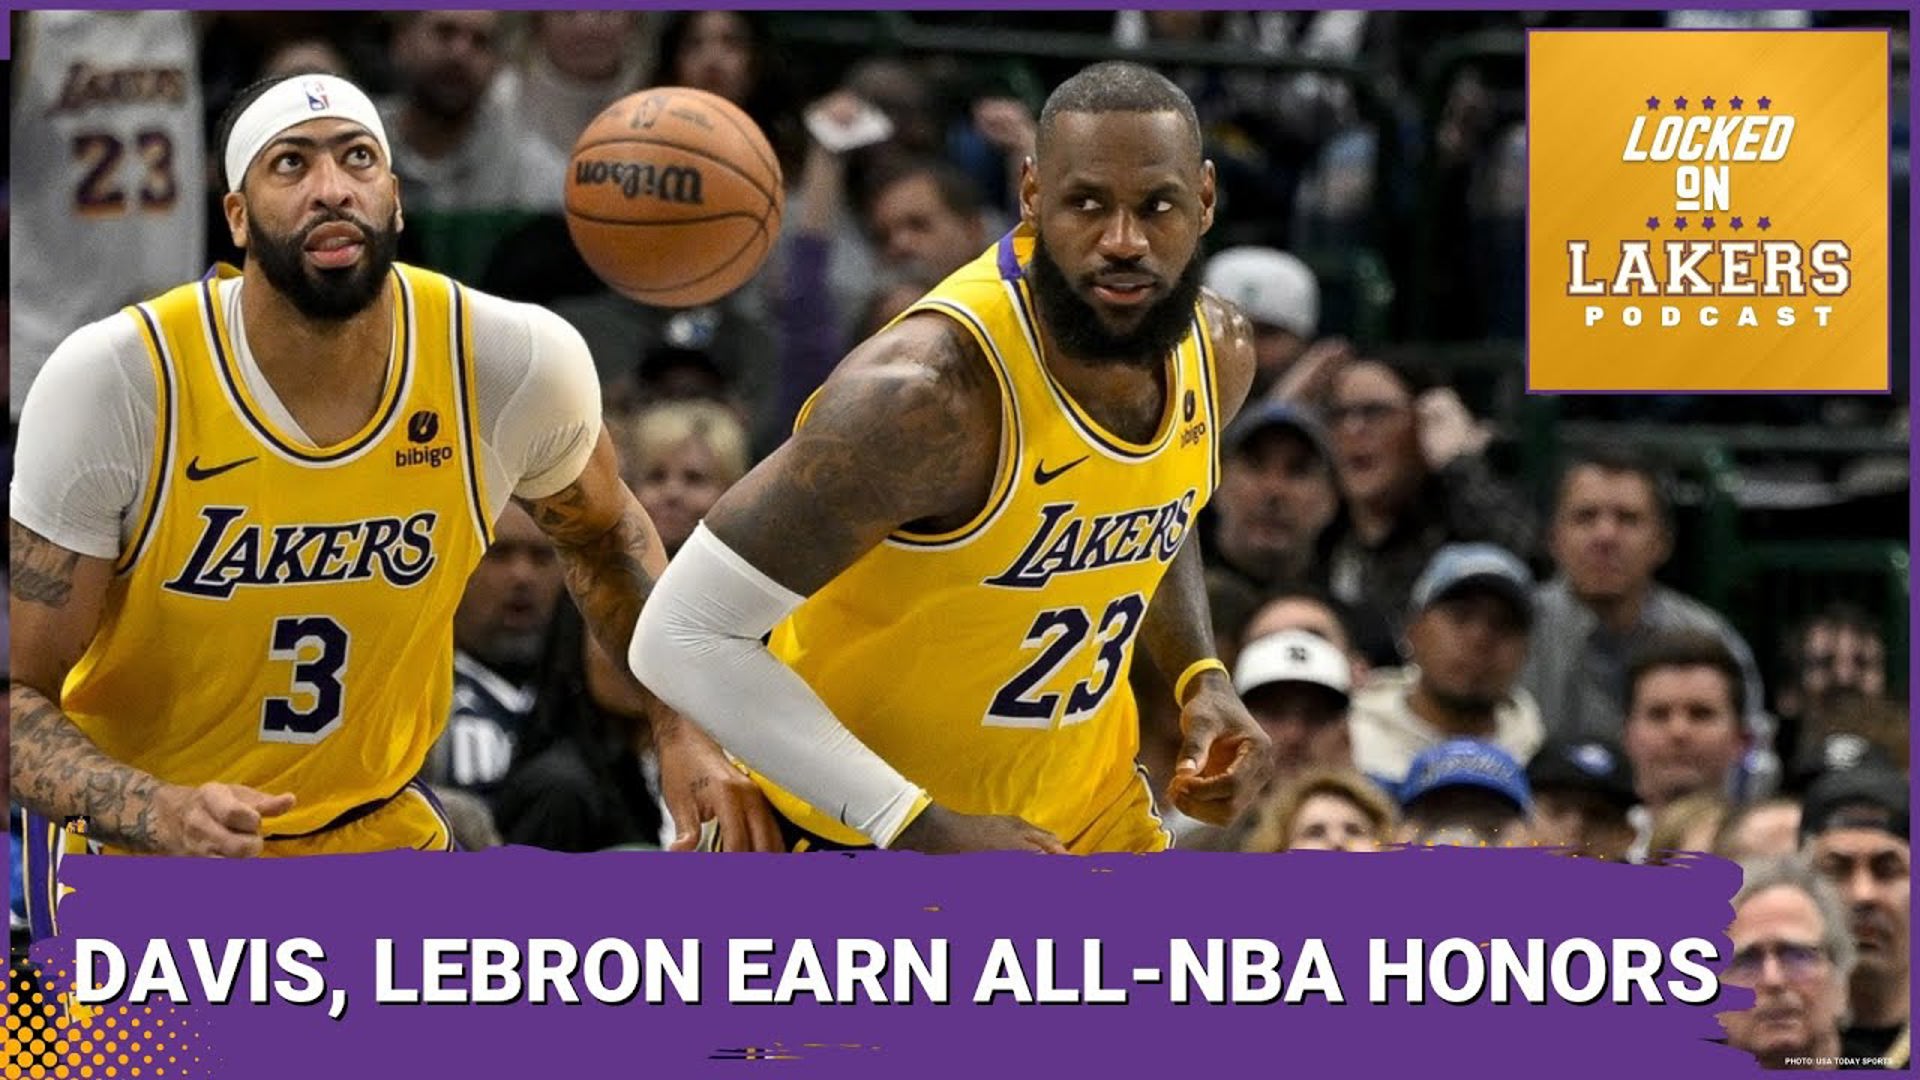 The Lakers and their two stars got some good news Wednesday, when the league announced its All-NBA squads for the season.